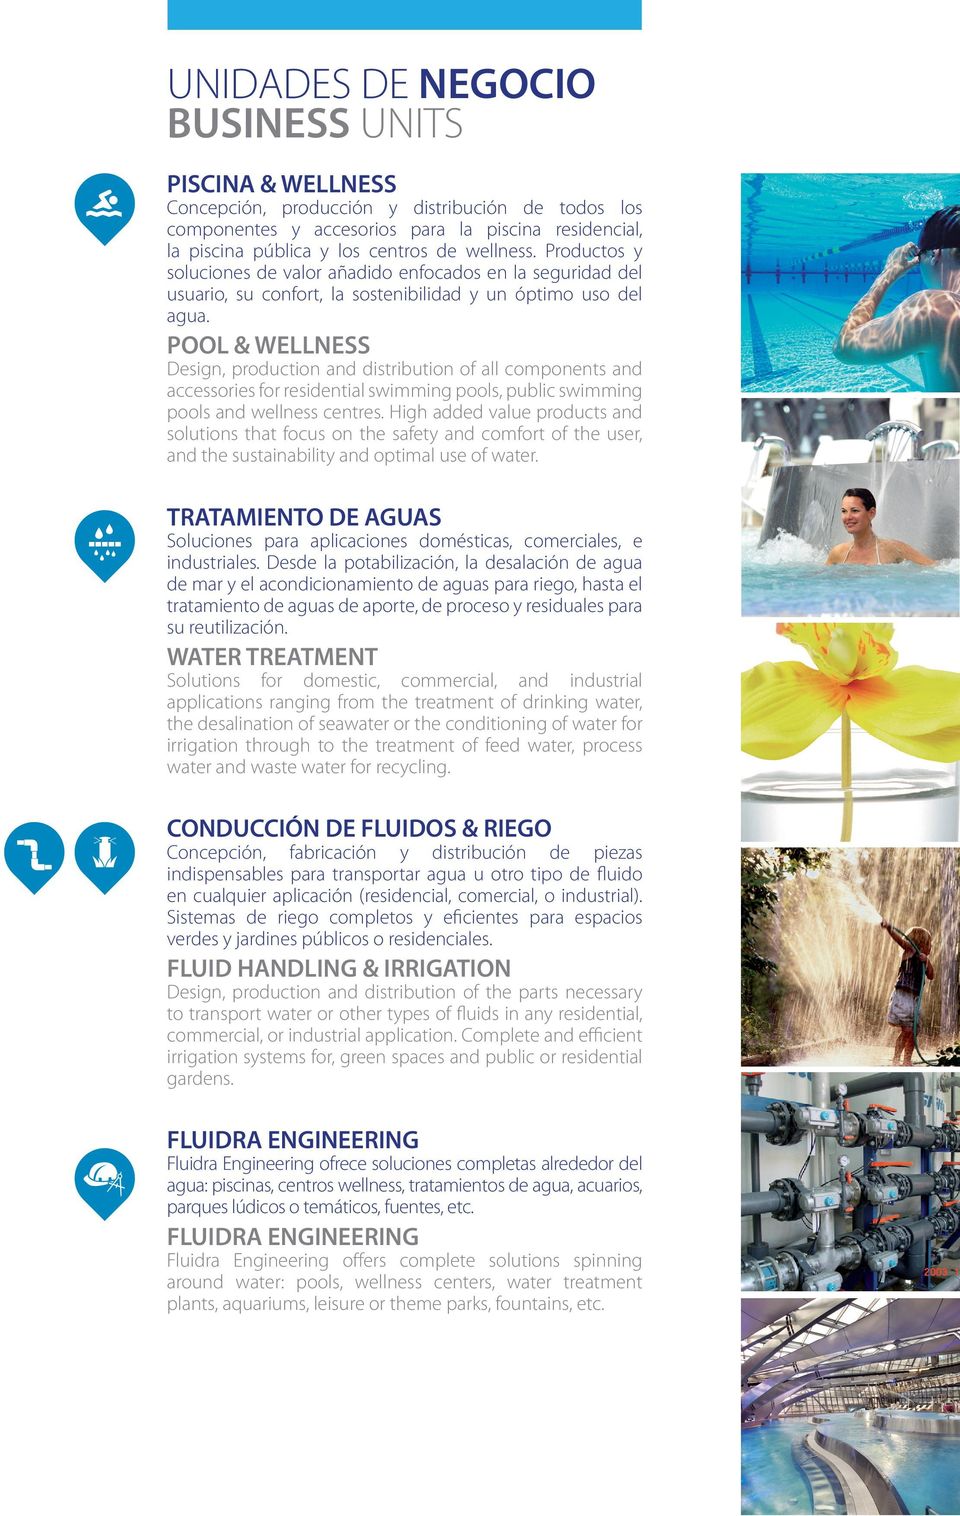 POOL & WELLNESS Design, production and distribution of all components and accessories for residential swimming pools, public swimming pools and wellness centres.